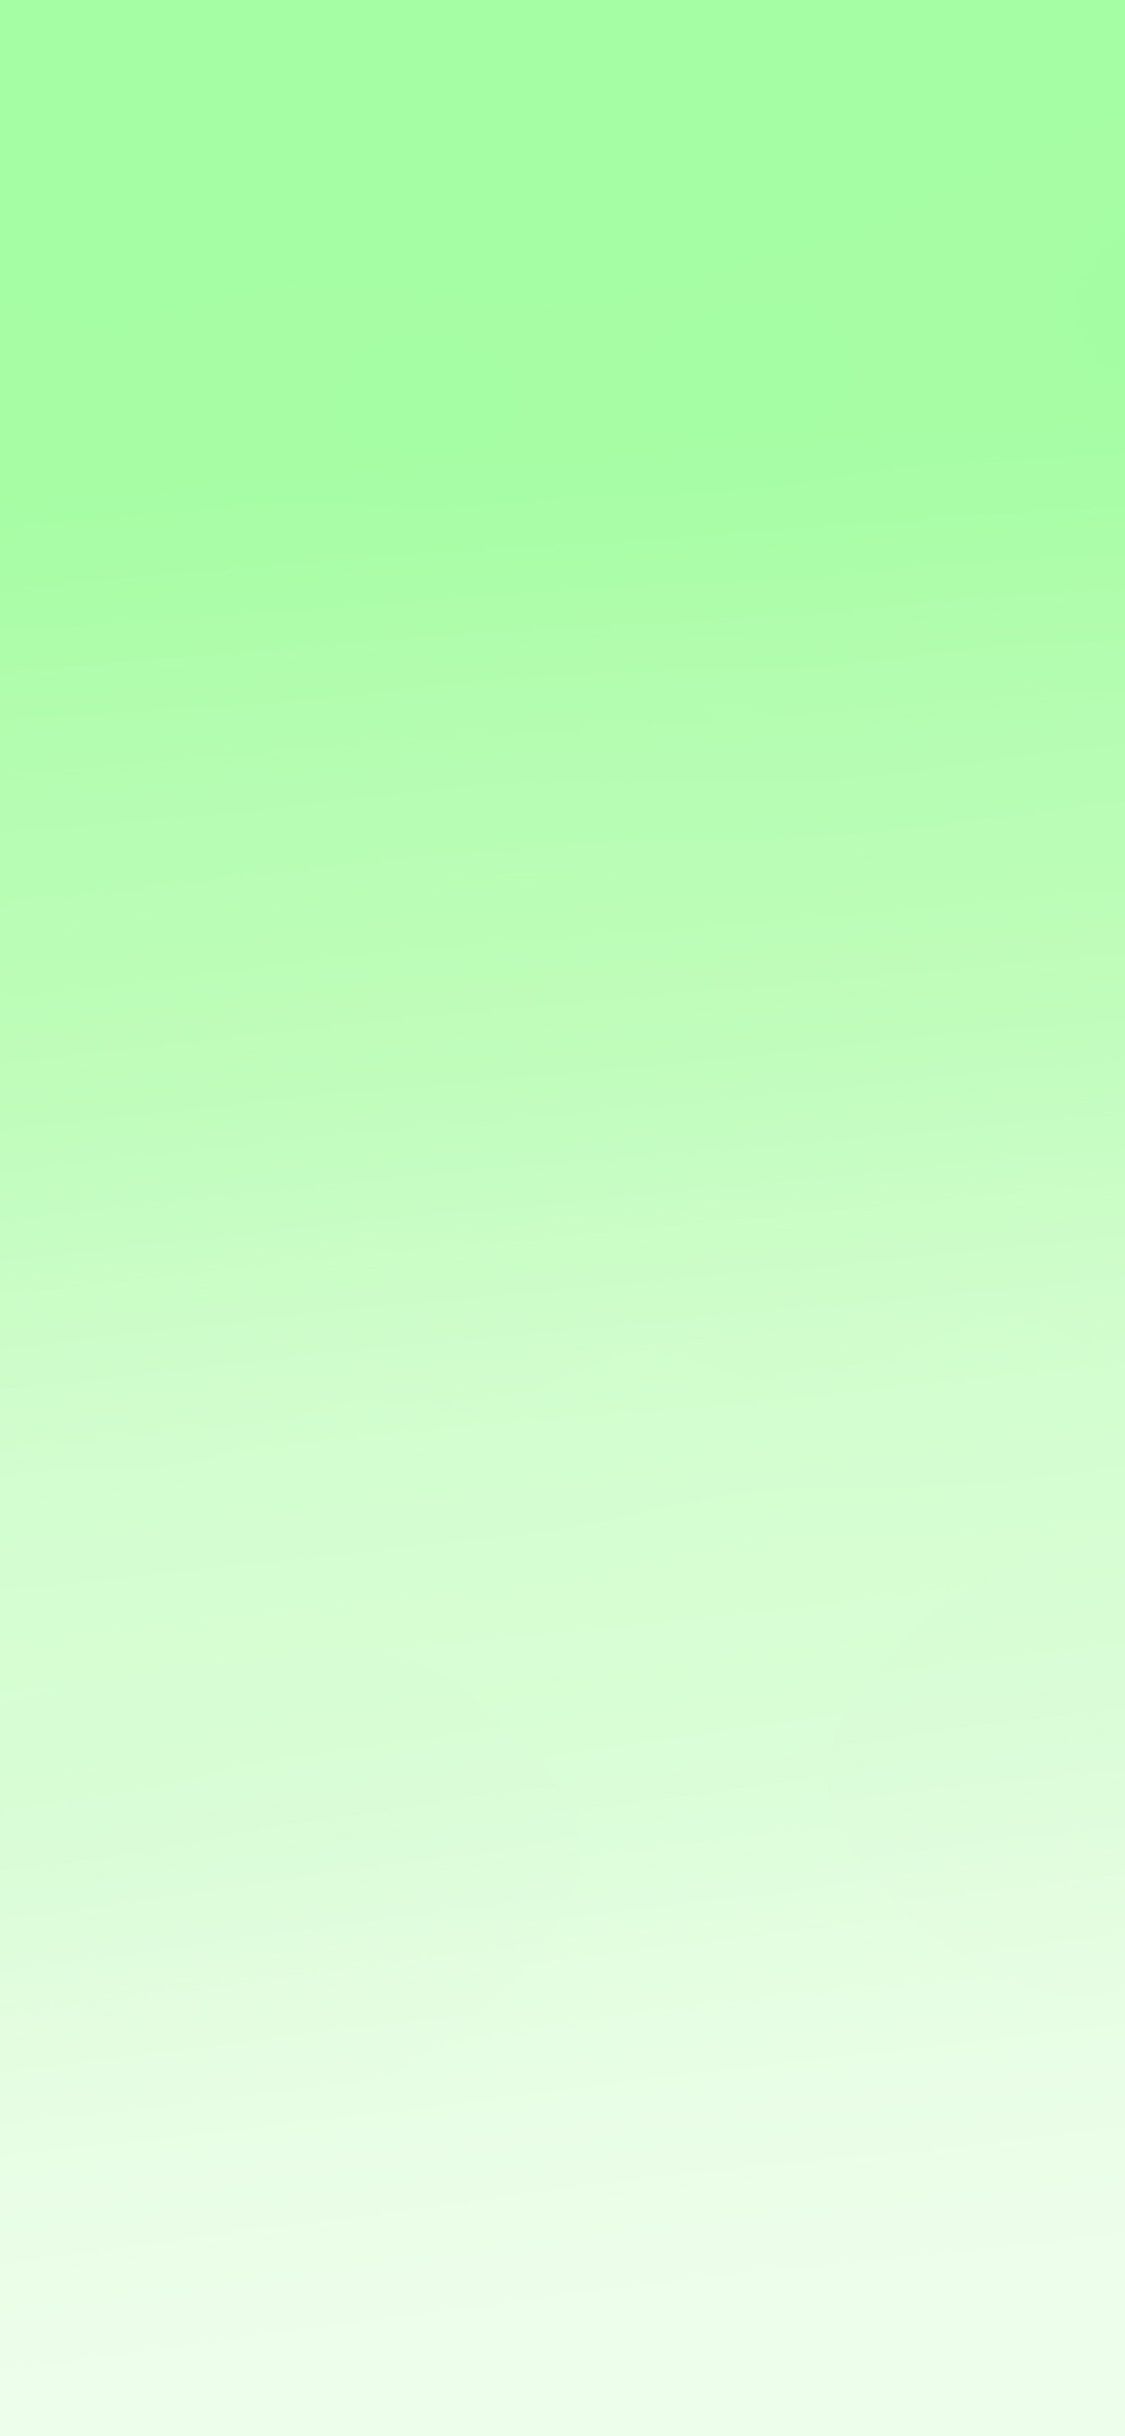 A gradient image of a green and white color - Soft green, lime green, light green